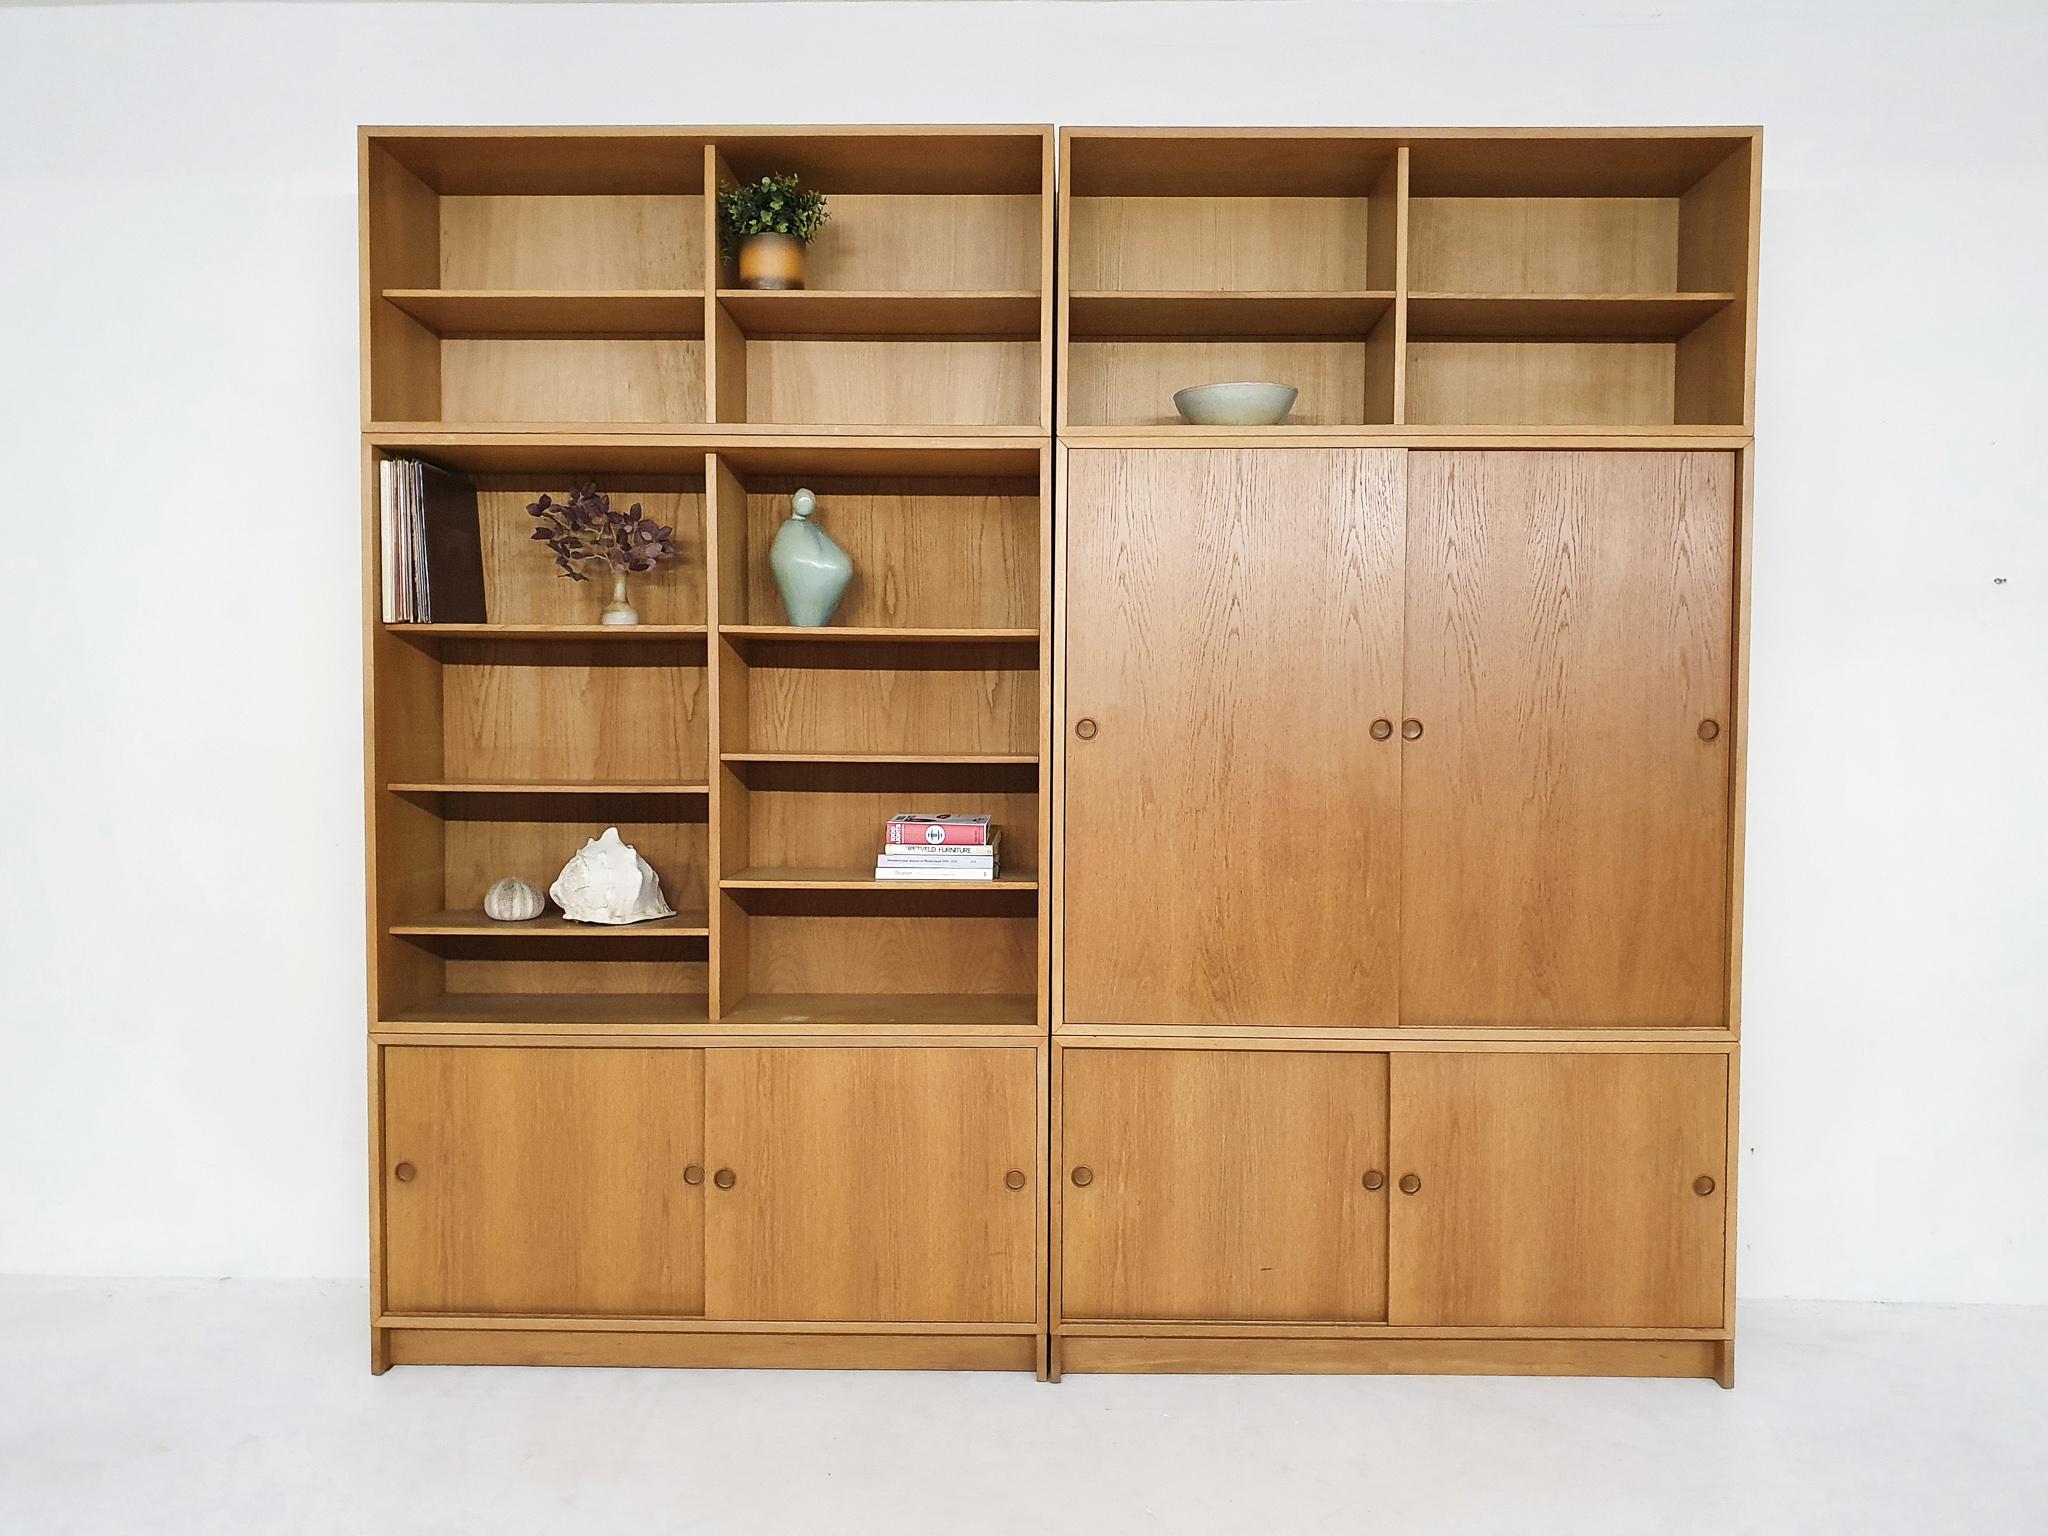 Light oak cabinet consistent of six parts, so you can make different compositions. Model Oresund, designed by Borge Mogensen for Karl Andersson.
The cabinet is in good conditiion, with some traces of use consistent with age and use.
Marked at the